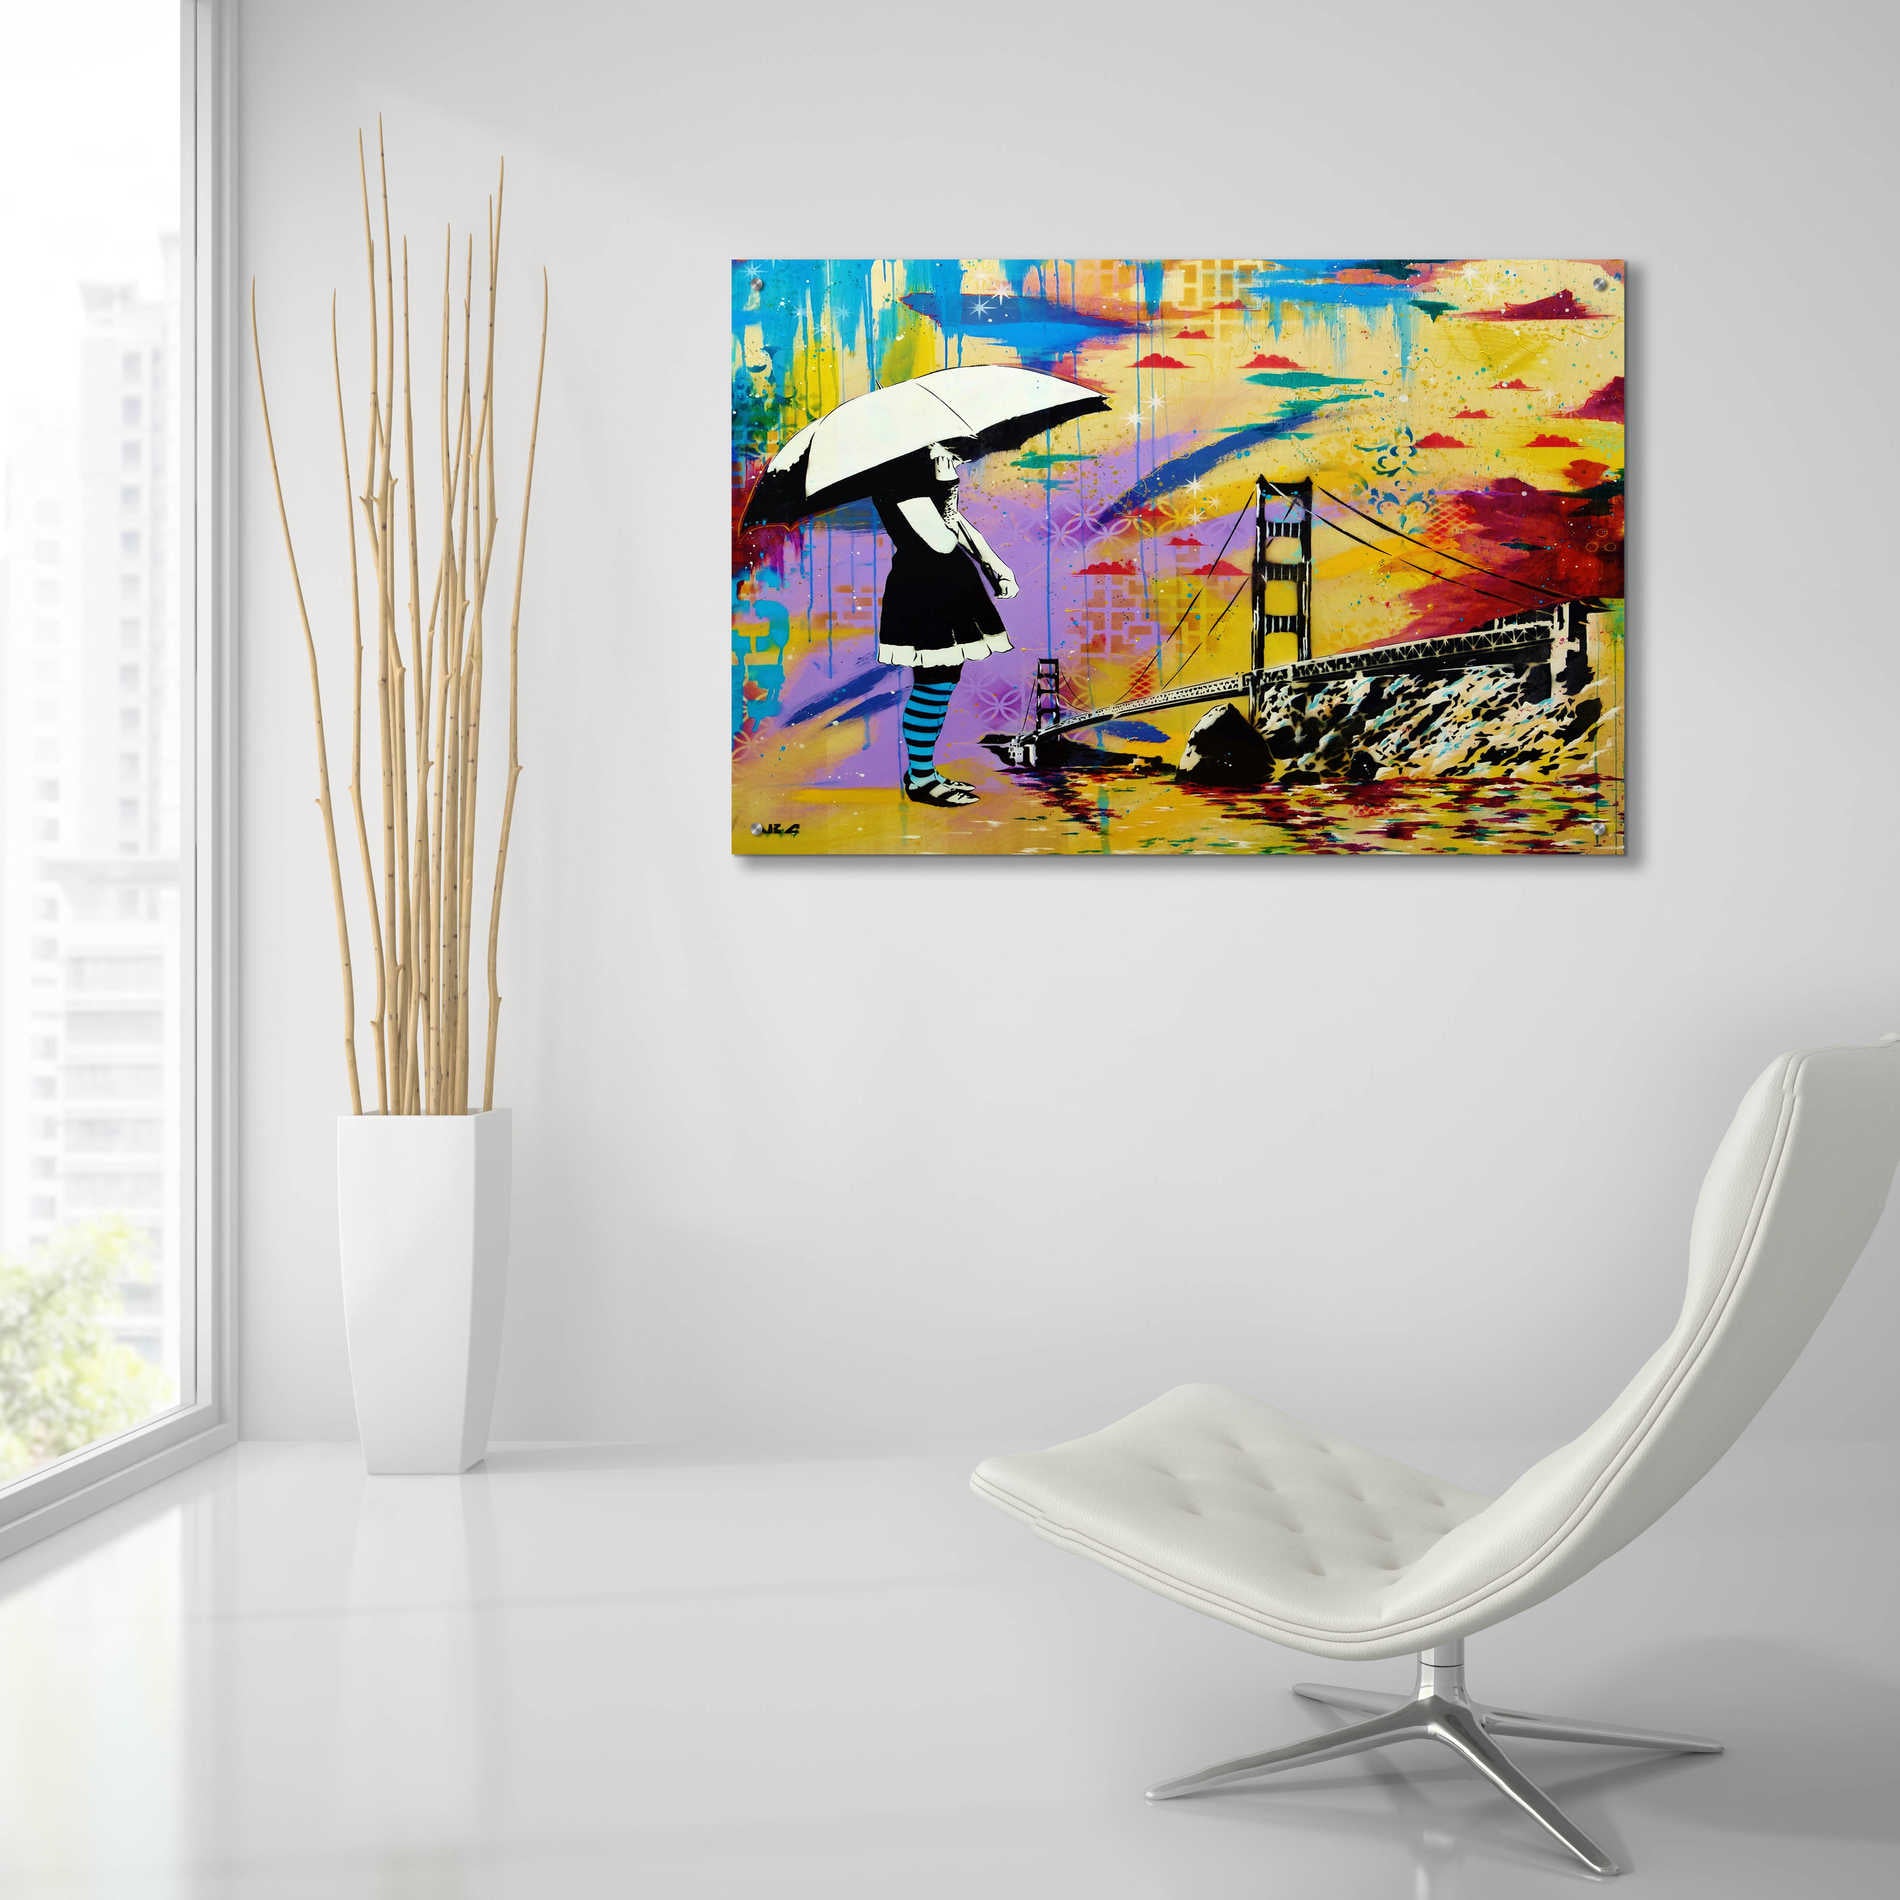 Epic Art 'Shelter at Bay' by AbcArtAttack, Acrylic Glass Wall Art,36x24